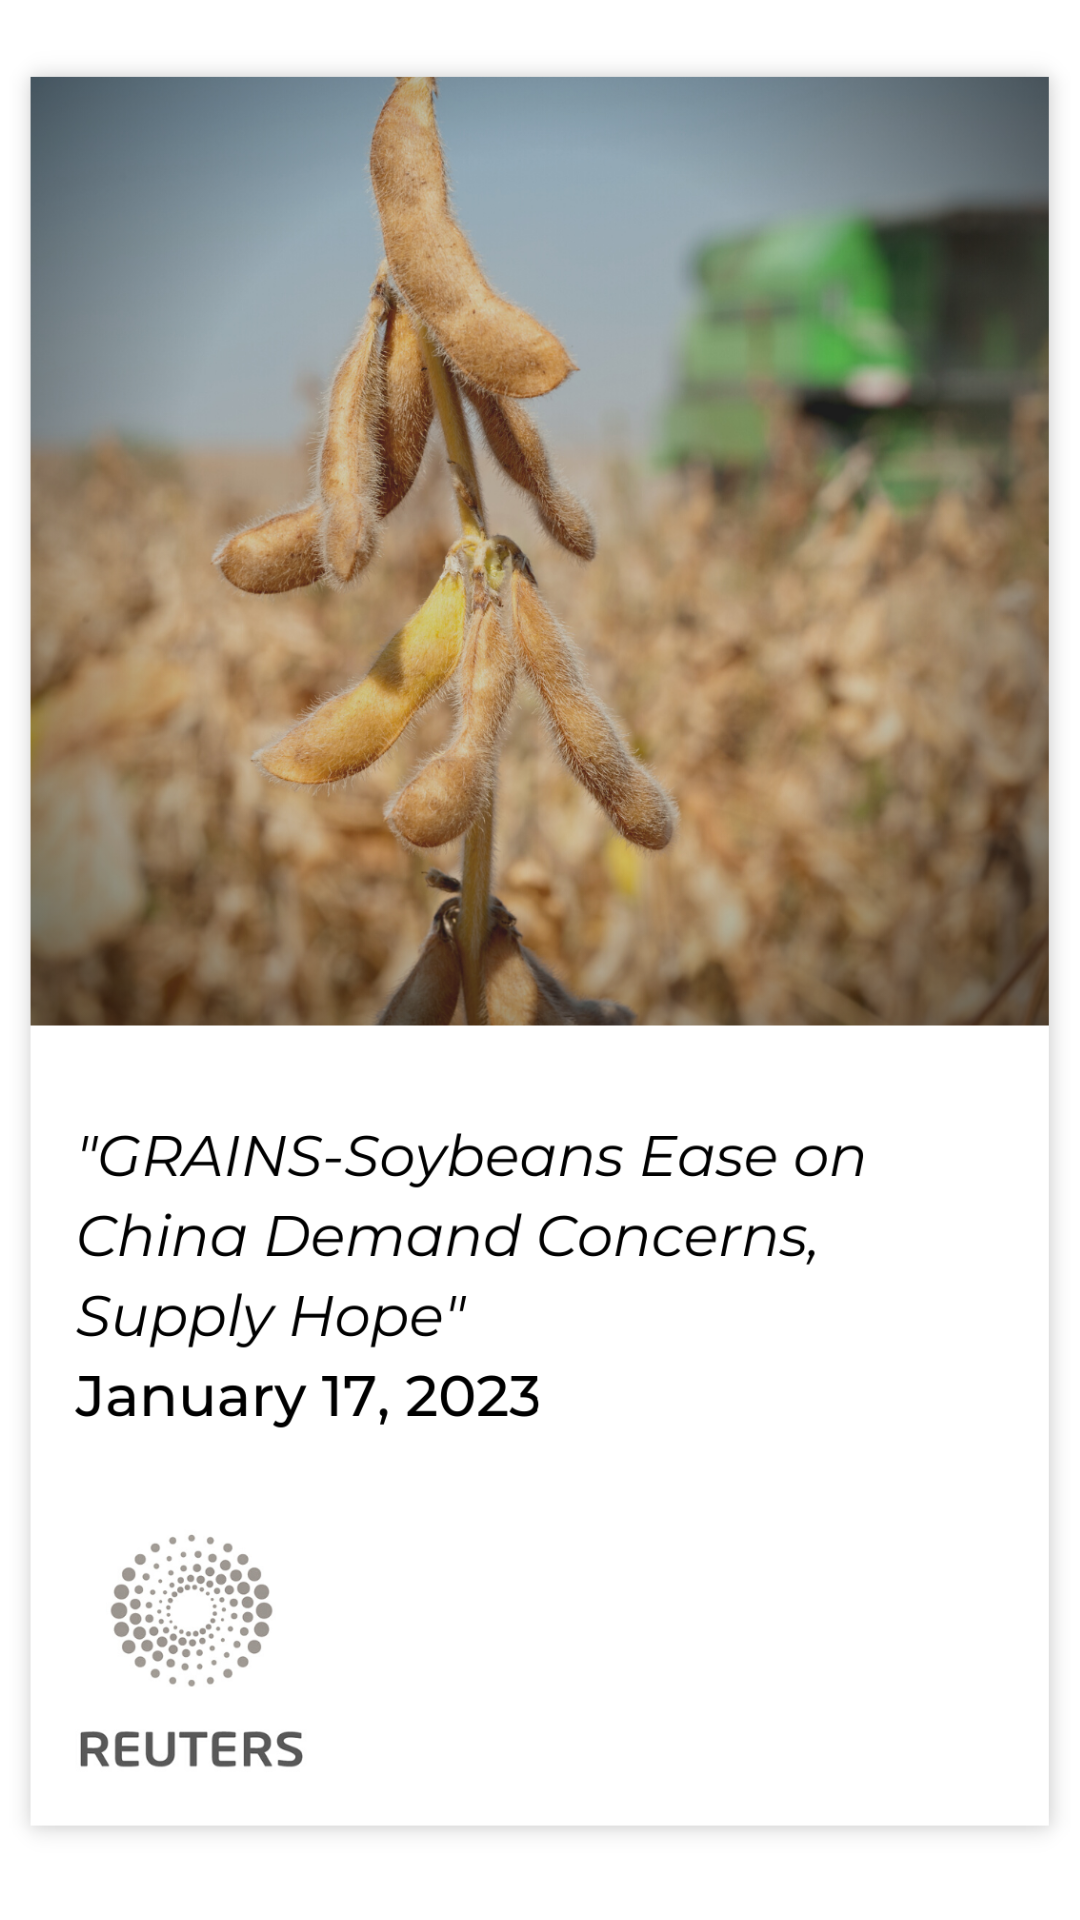 GRAINS-Soybeans Ease on China Demand Concerns, Supply Hope"